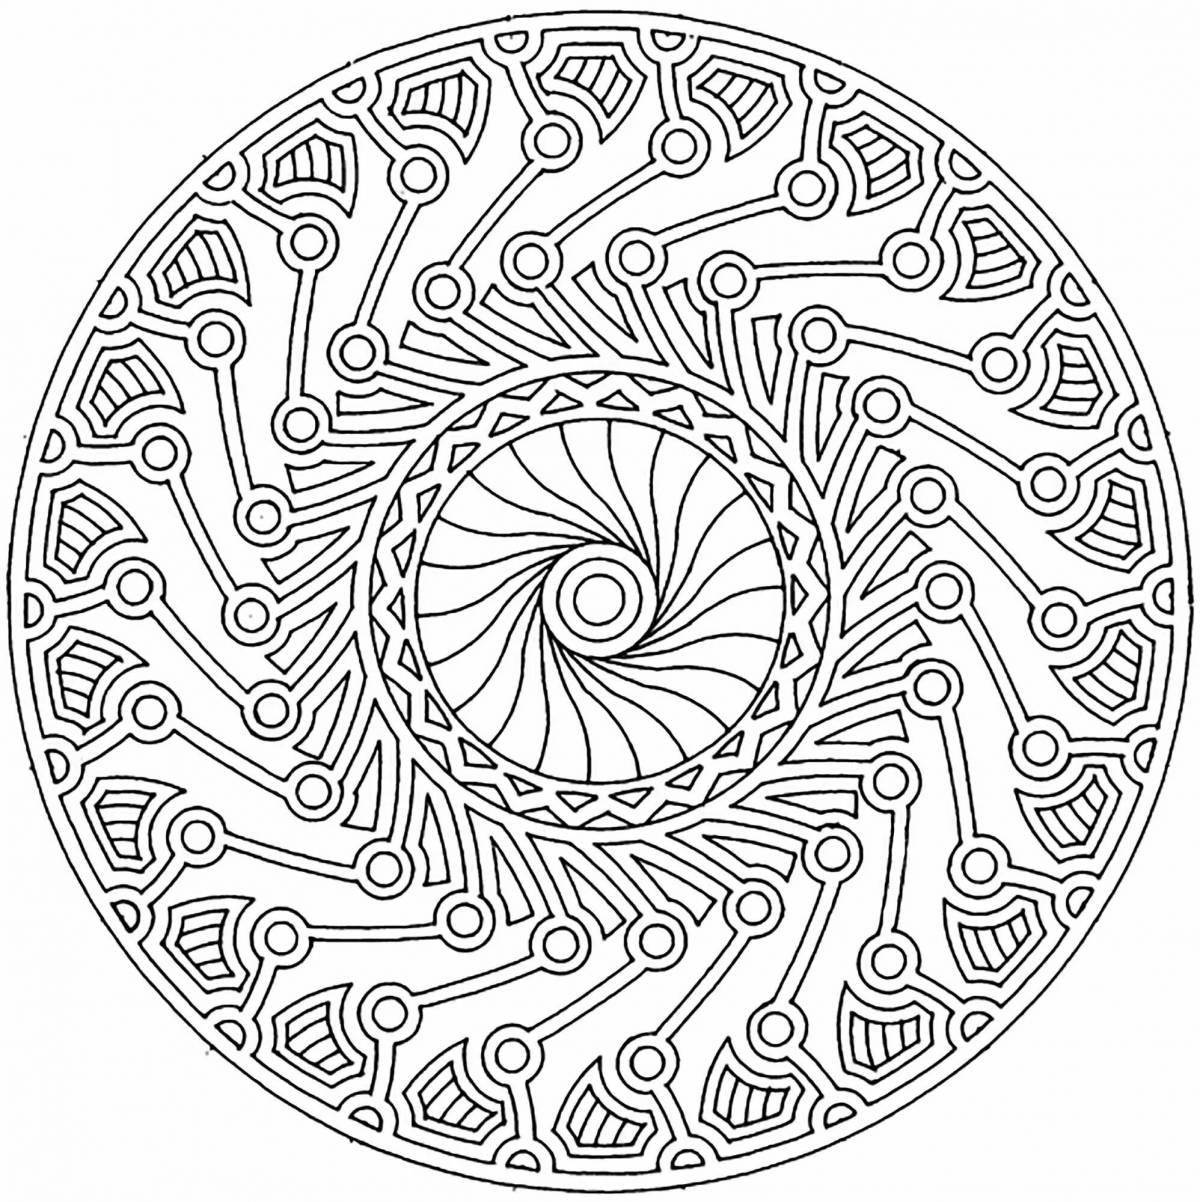 Exquisite animal spiral coloring